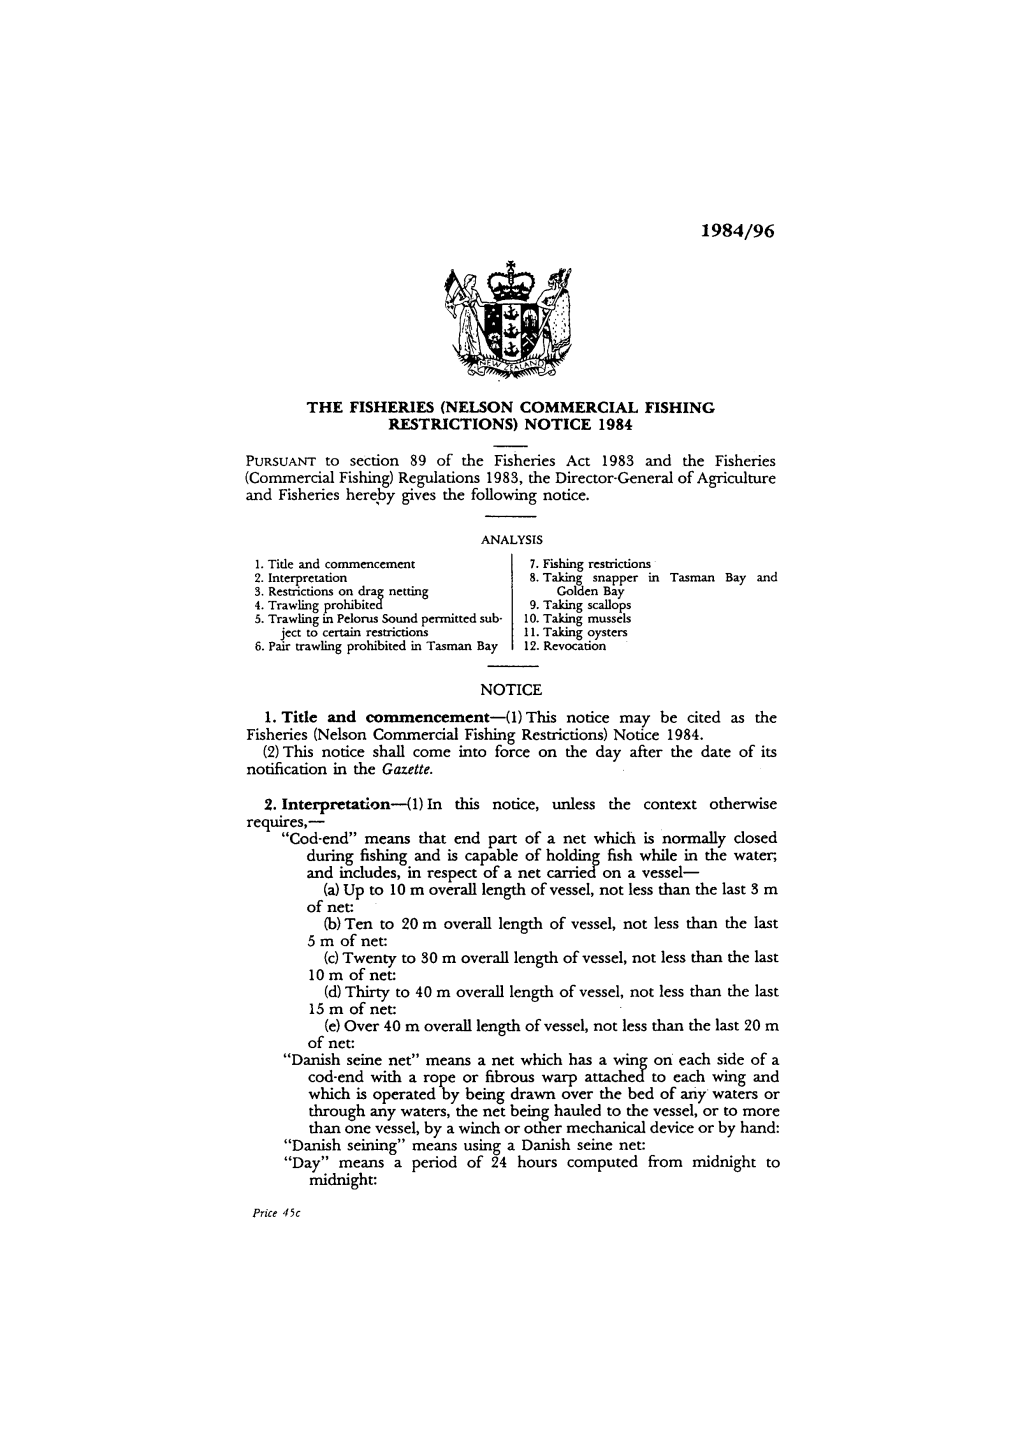 Fisheries (Nelson Commercial Fishing Restrictions) Notice 1984. (2) This Notice Shall Come Into Force on the Day After the Date of Its Notification in the Gaz.Ette